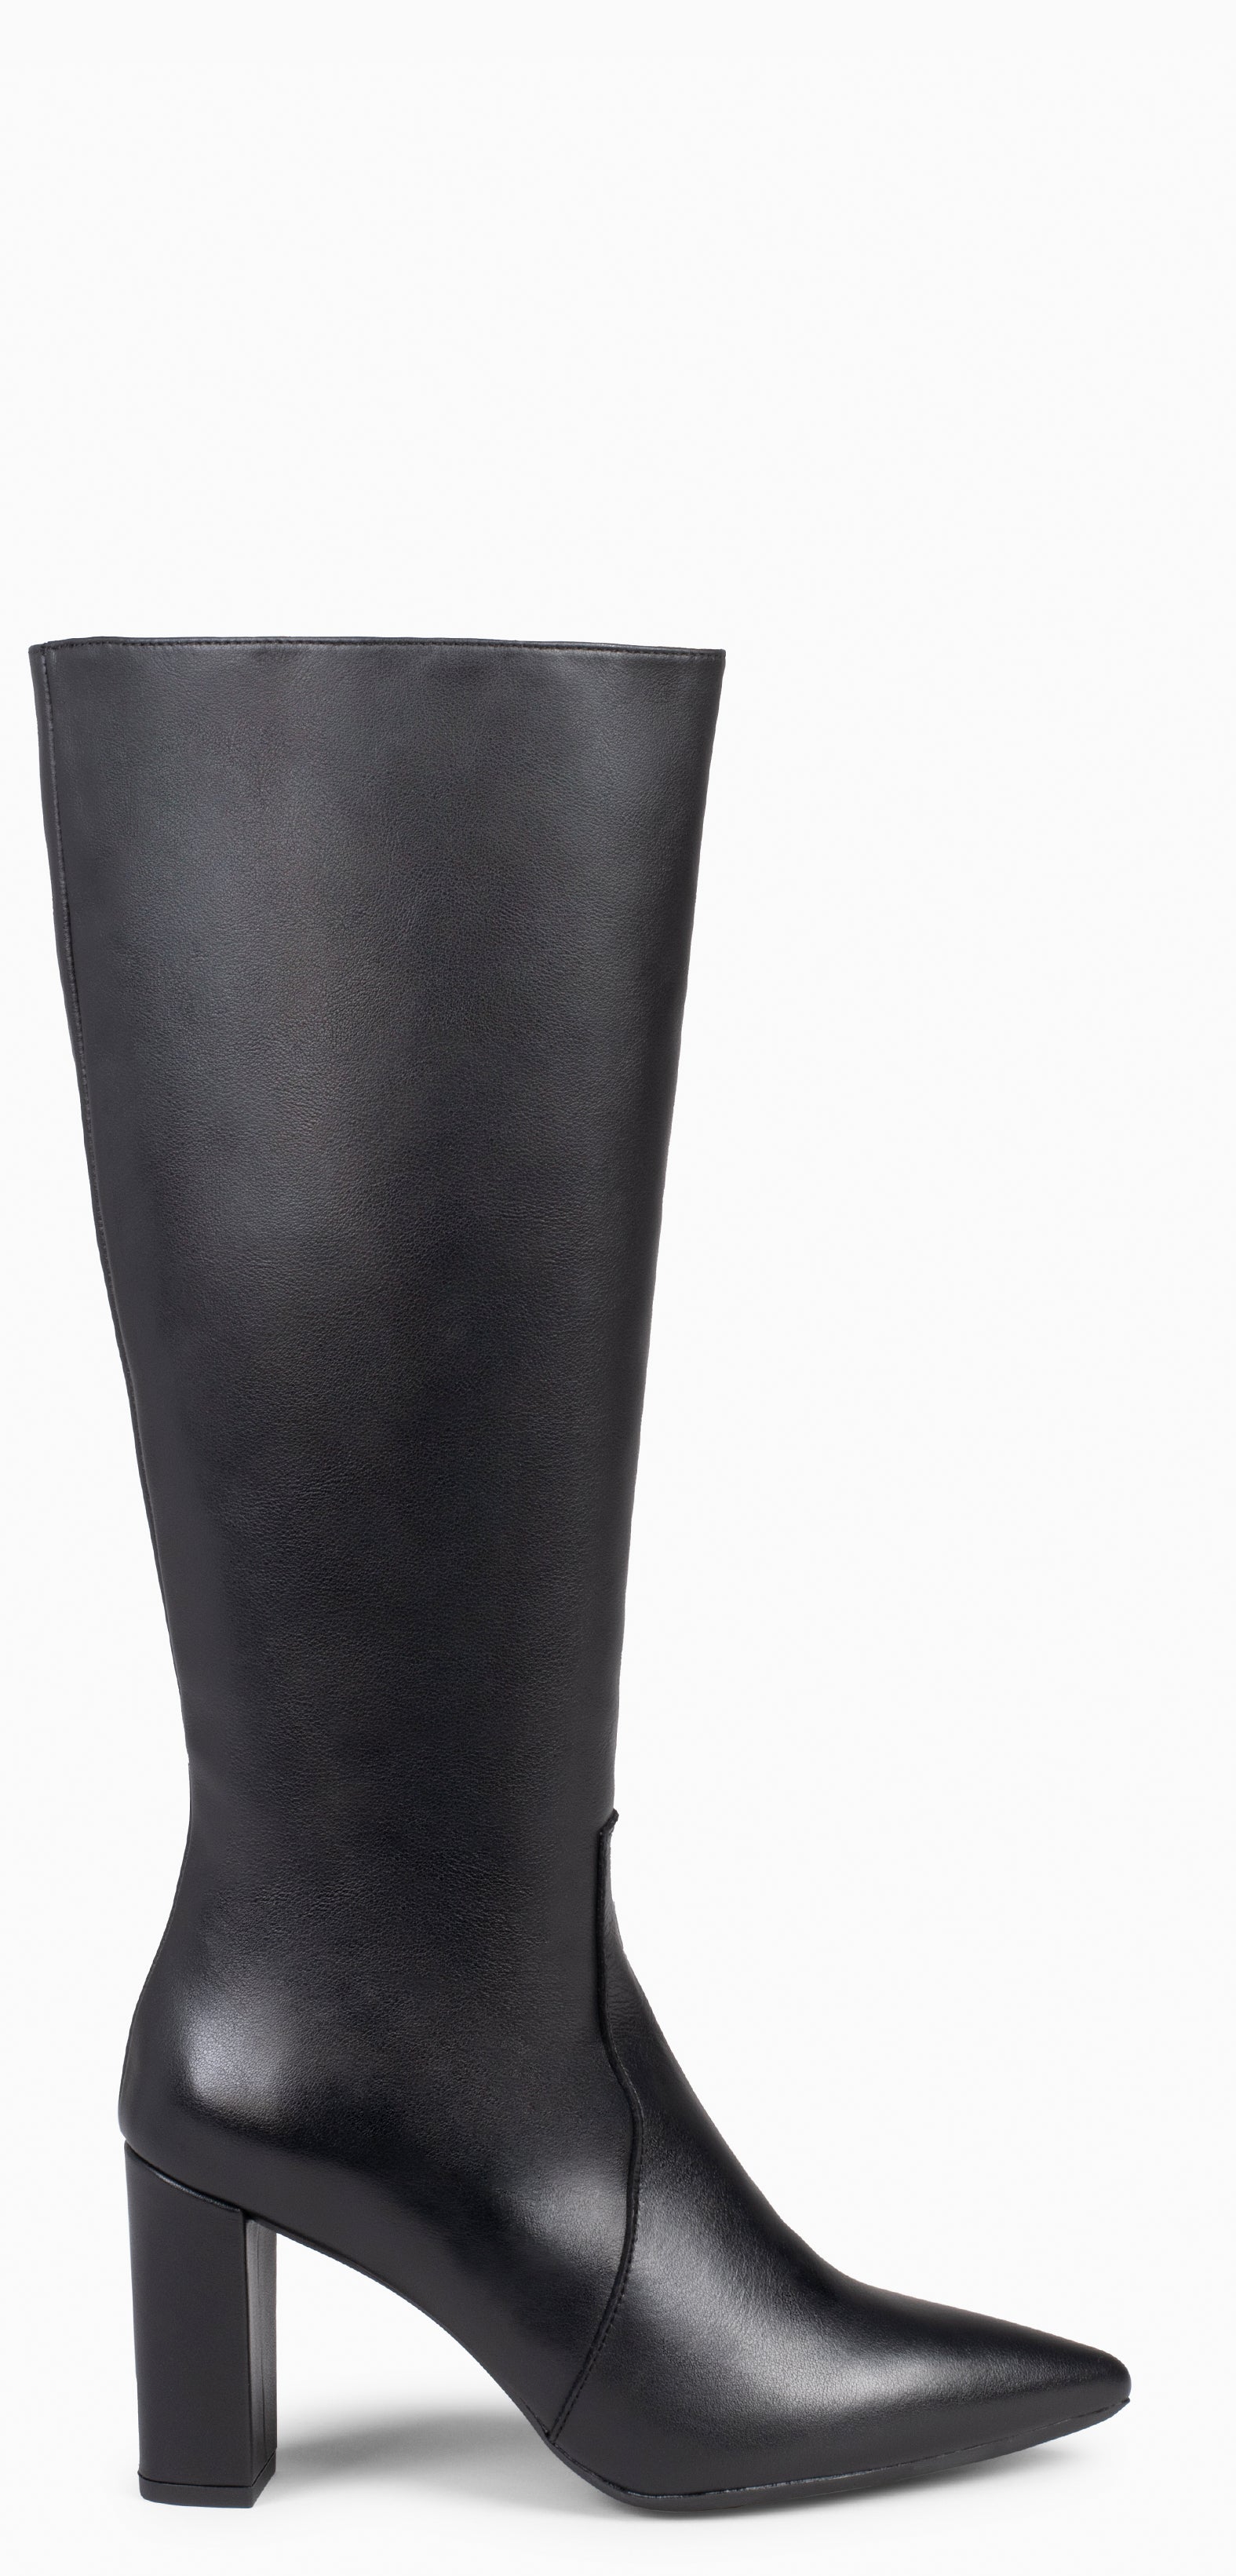 URBAN BOOT - BLACK high boots with zipper nappa